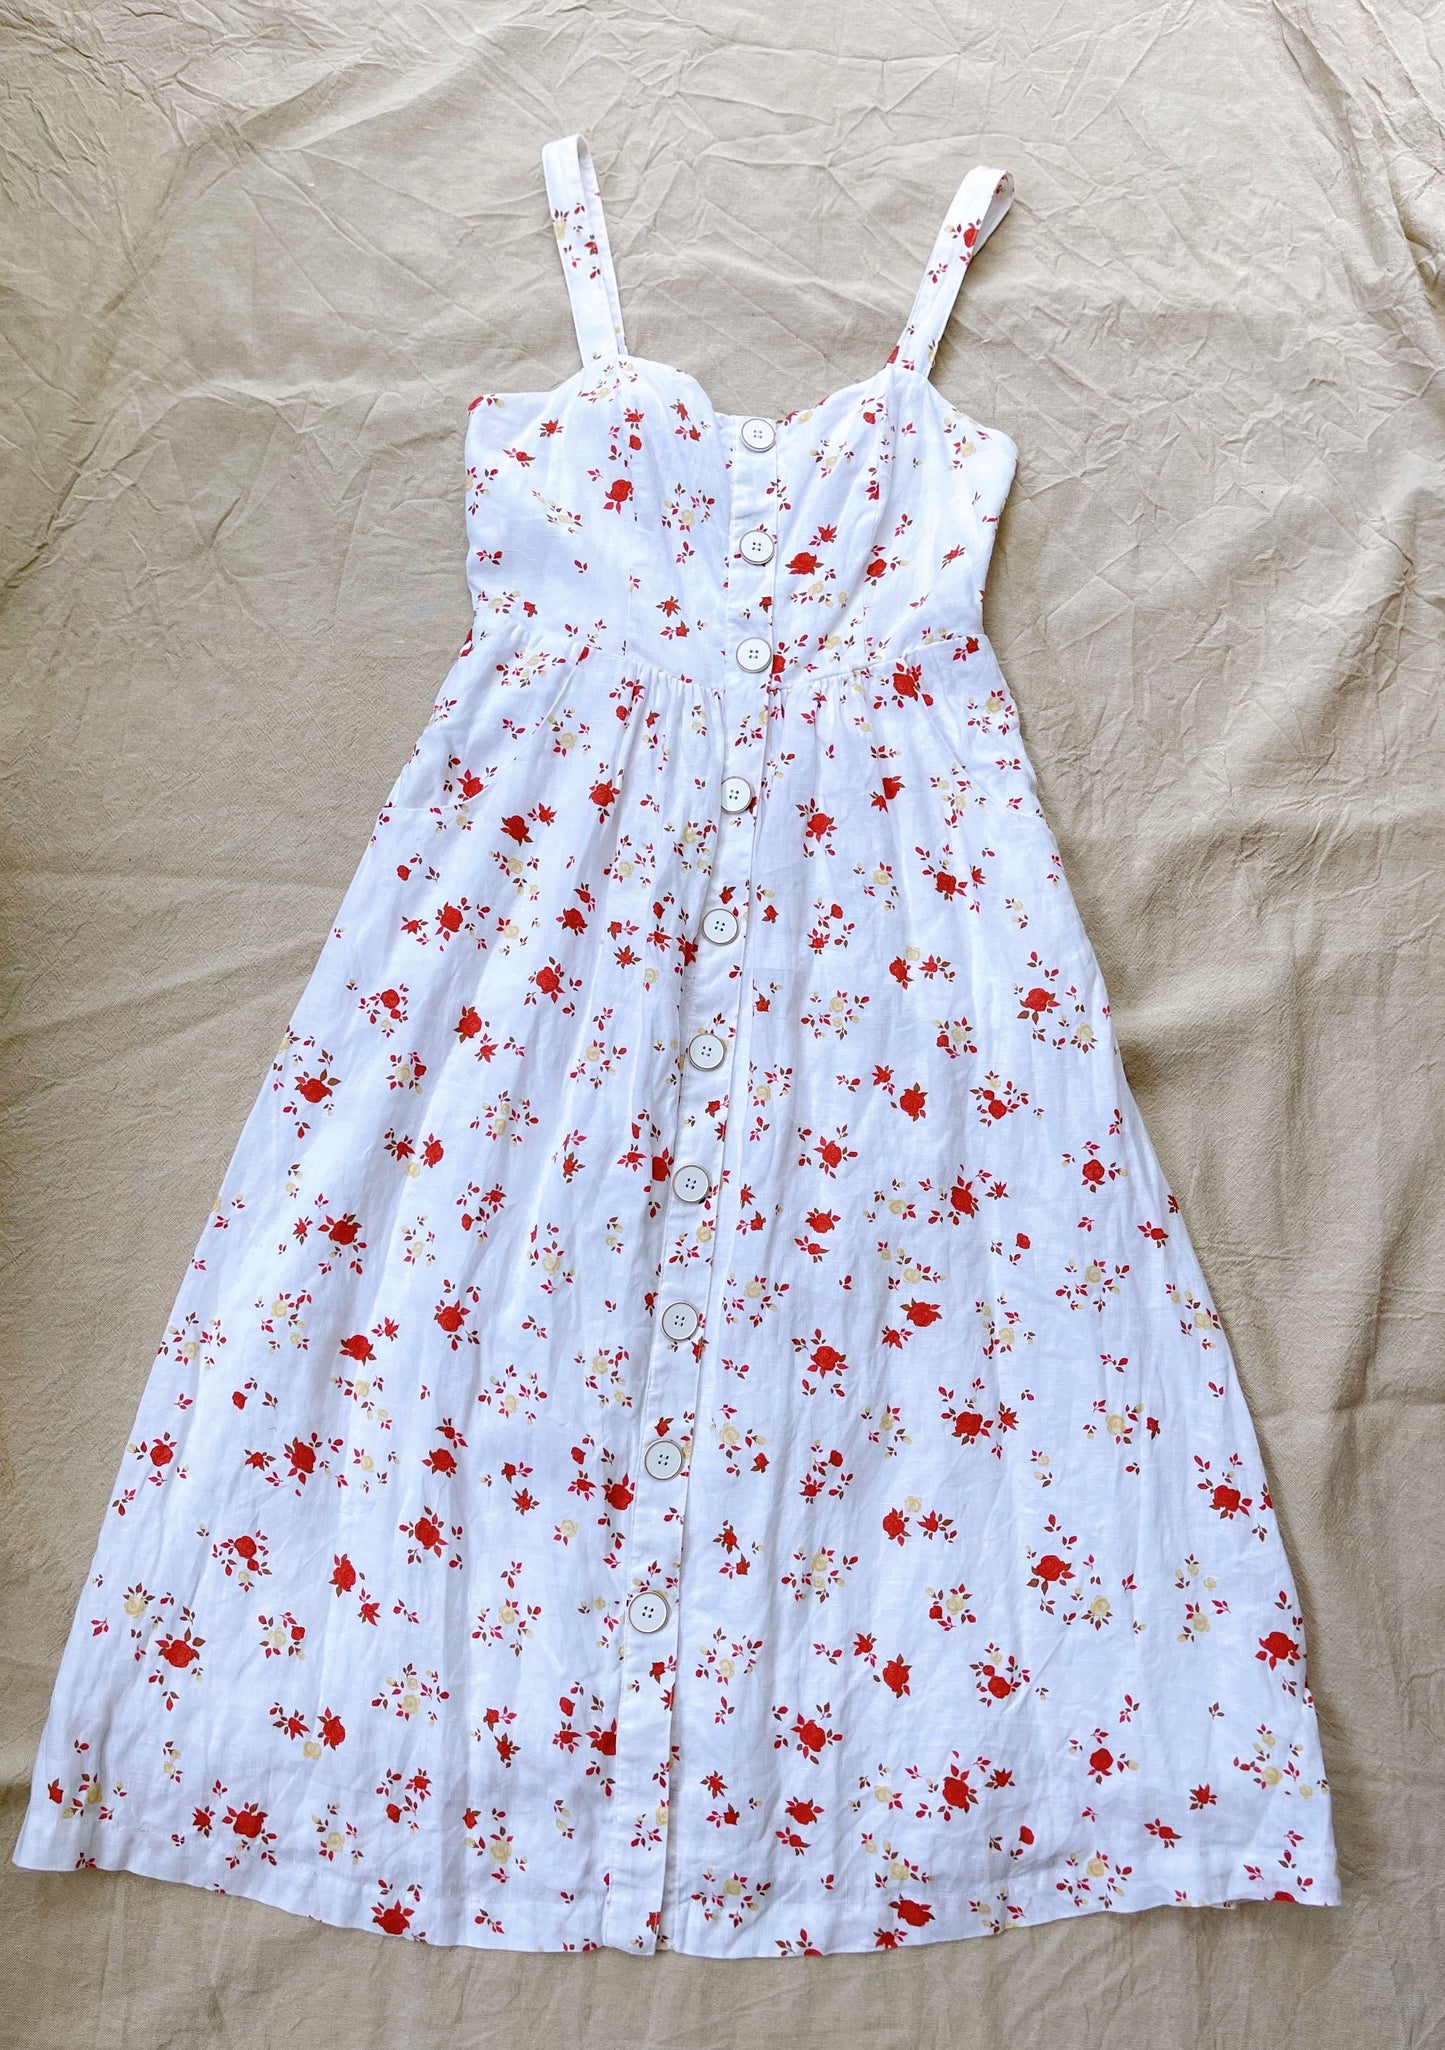 FRENCH CONNECTION FLORAL DRESS